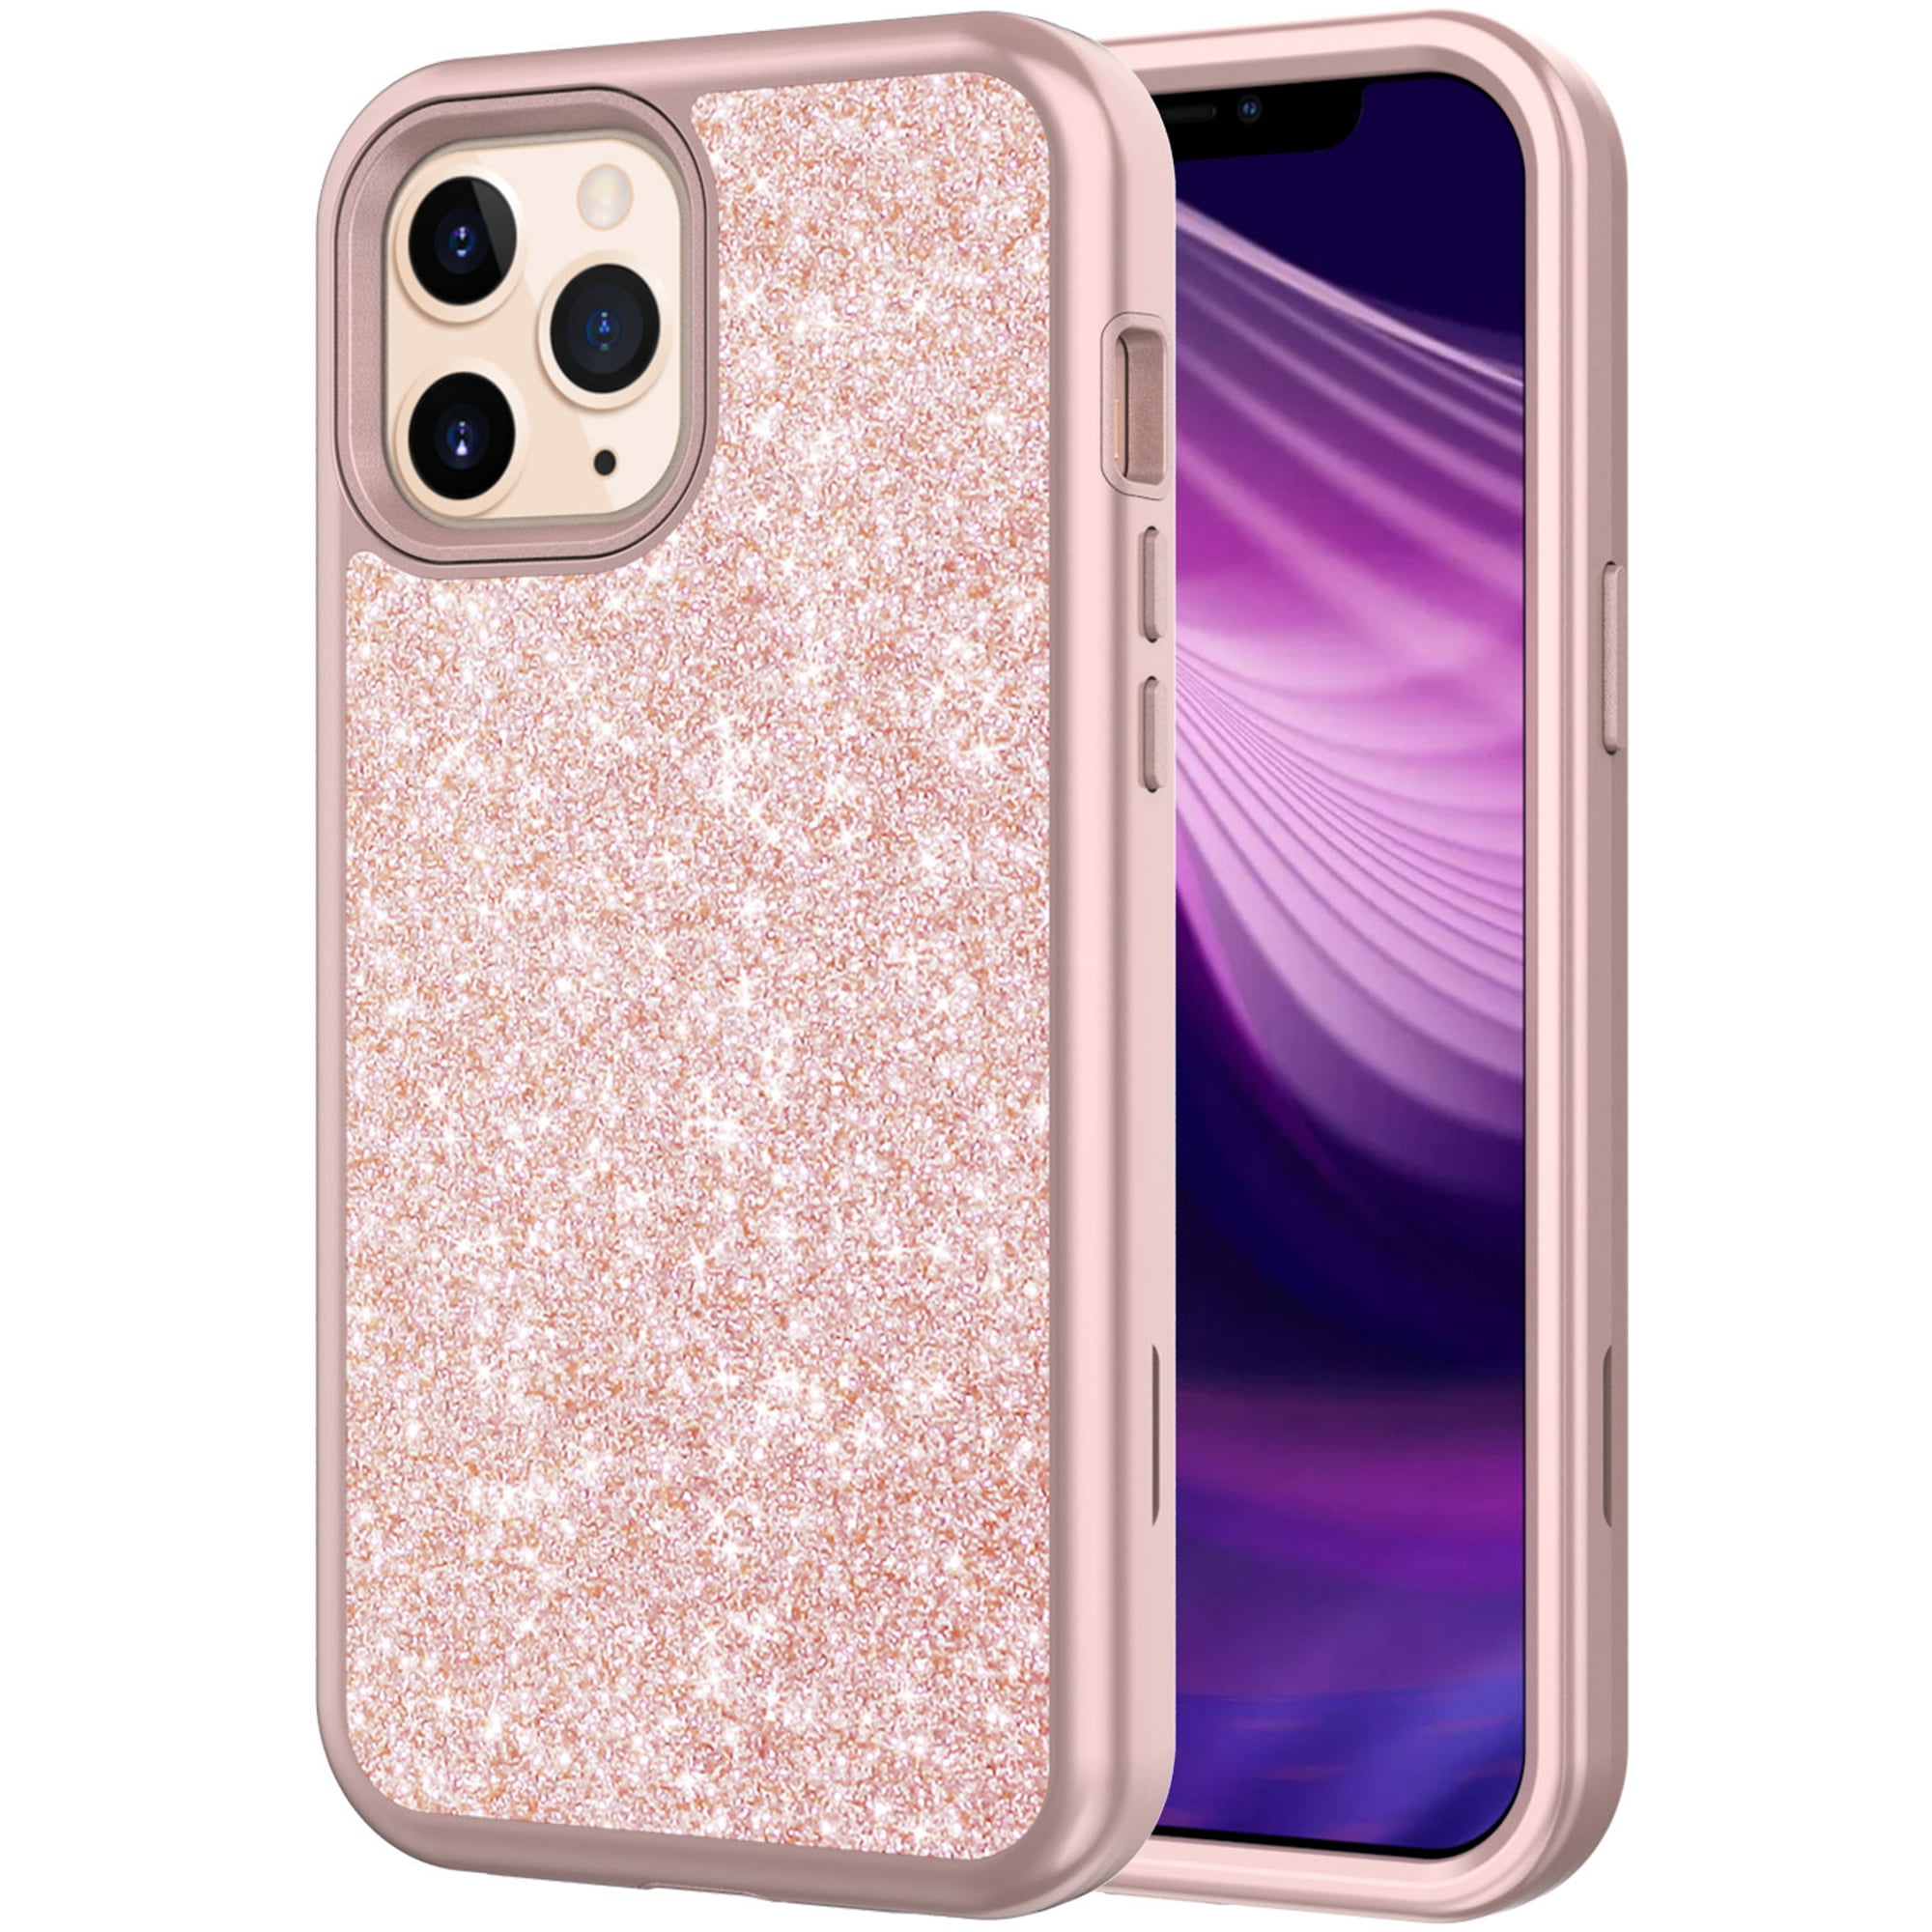  LXXZBC for iPhone 12 Pro Max 6.7 Bling Case,Luxury